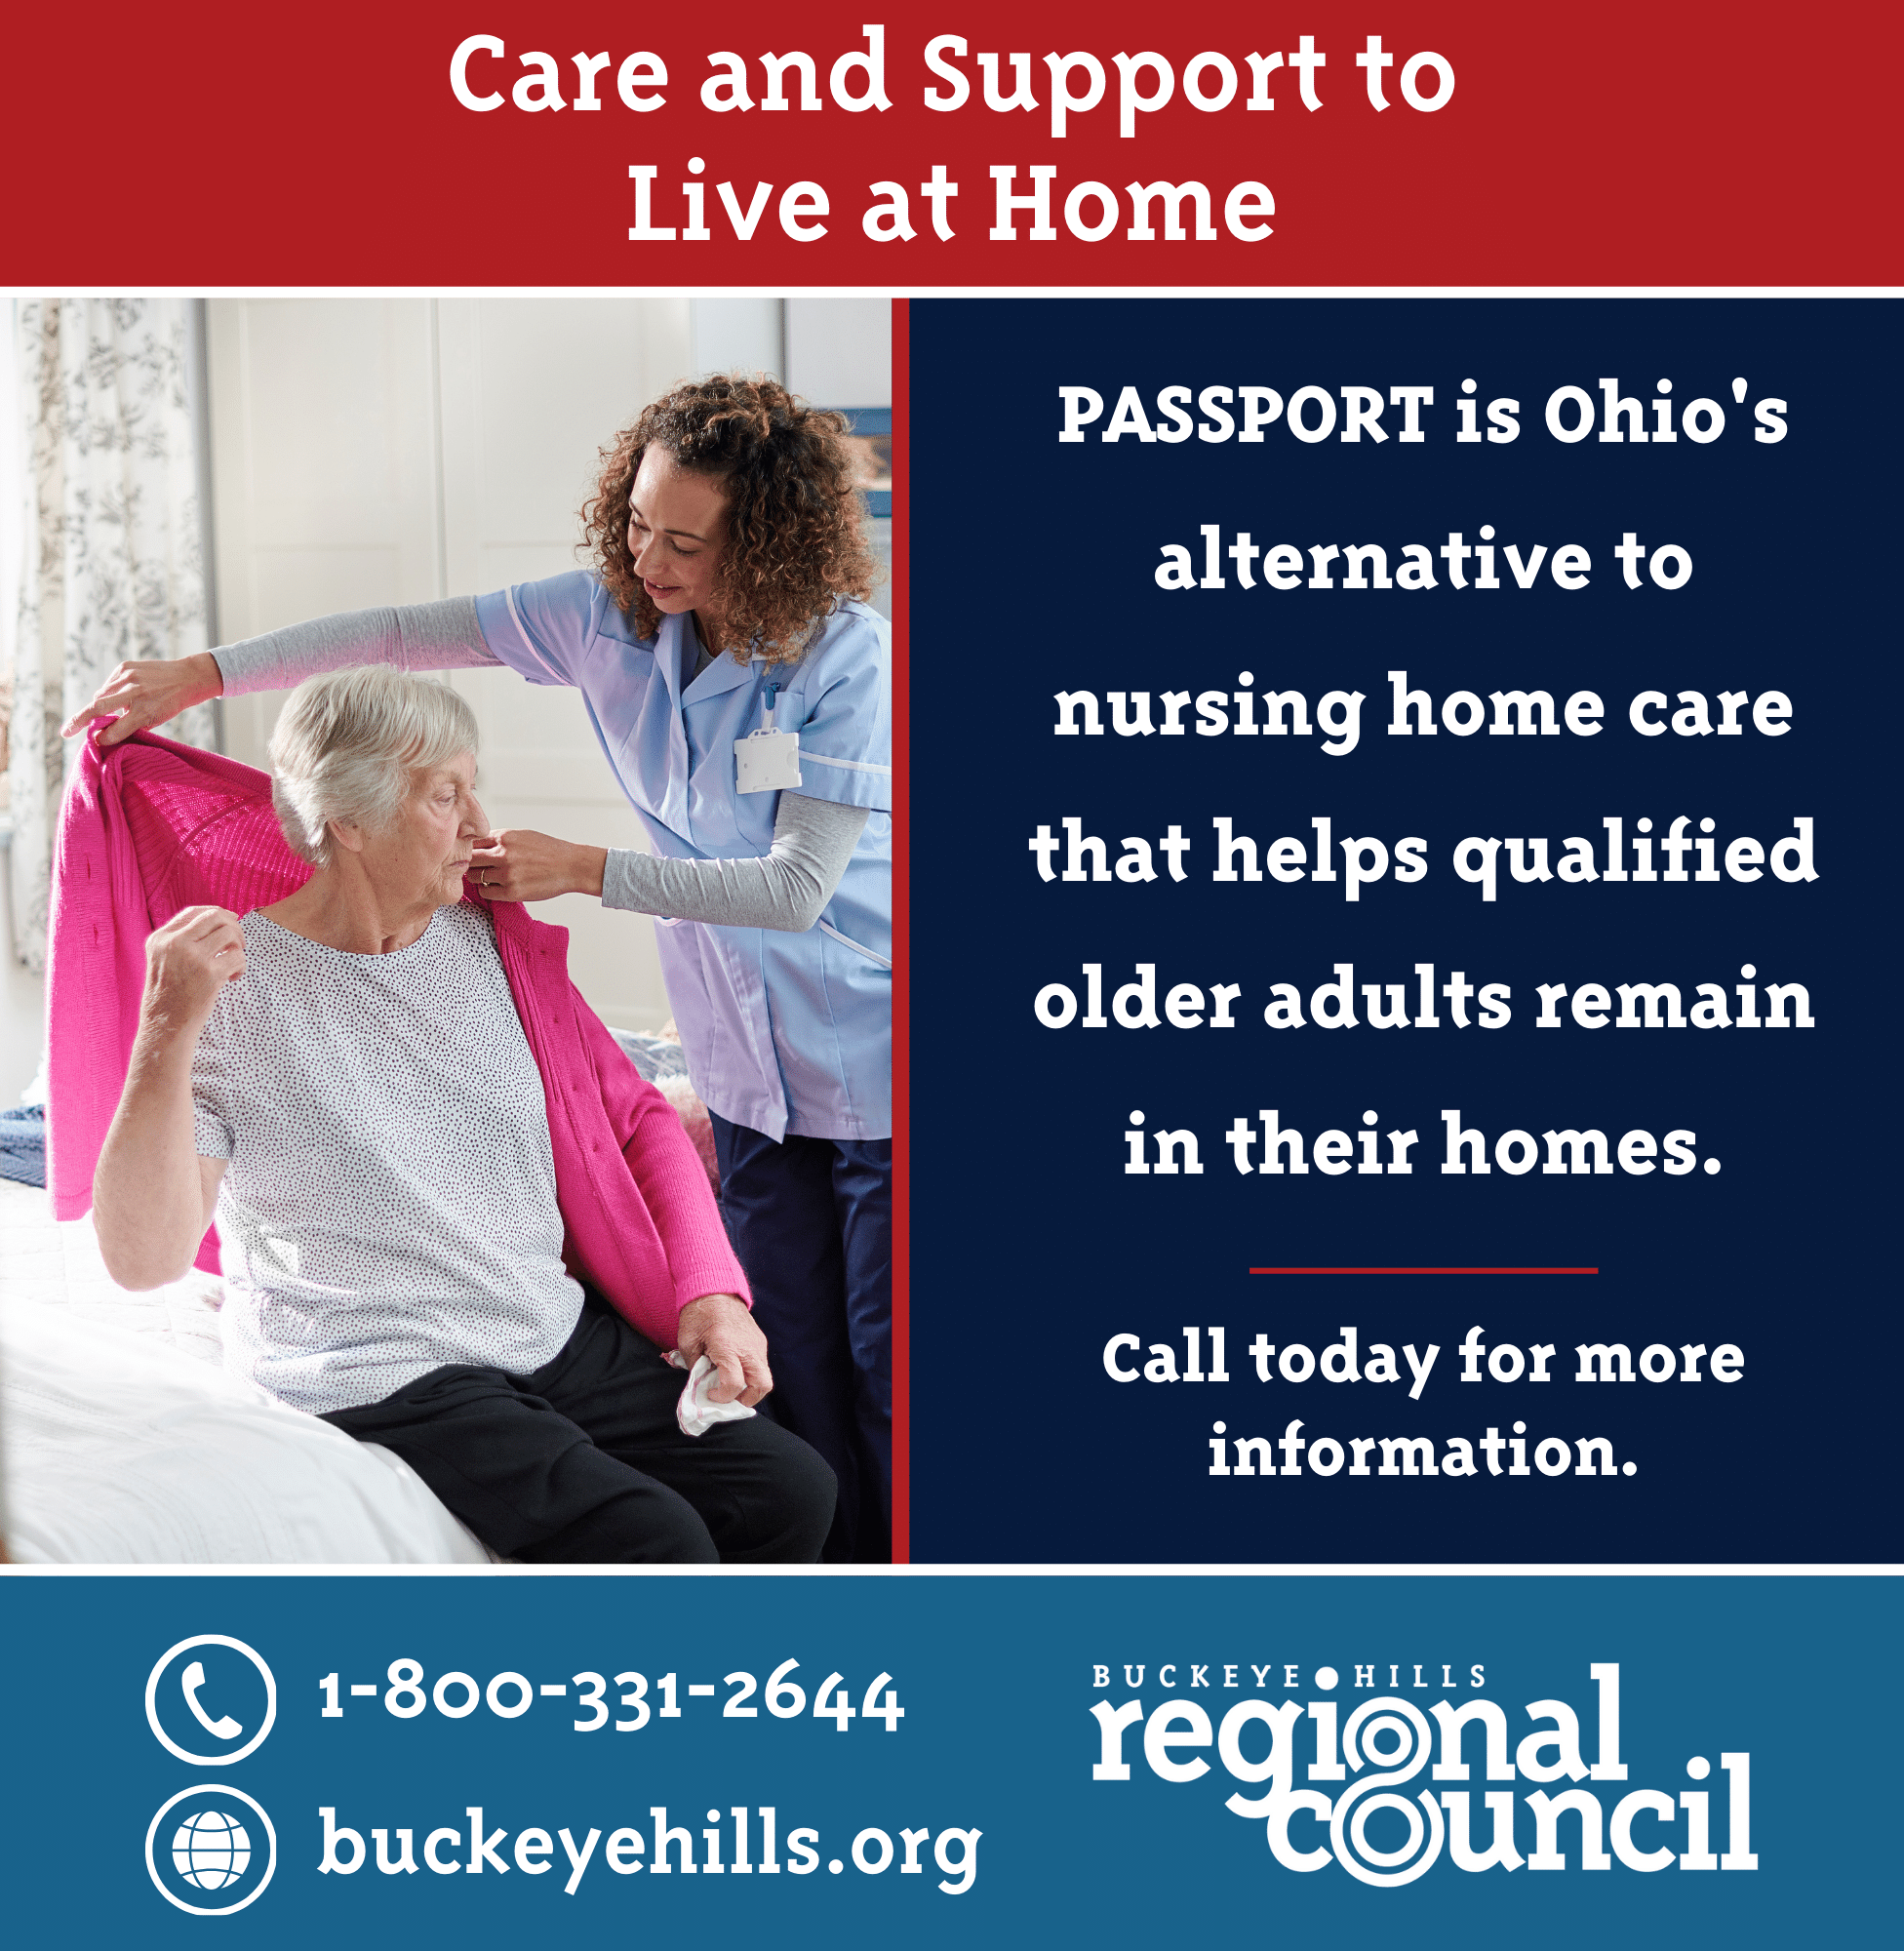 PASSPORT is Ohio's alternative to nursing home care that helps qualified older adults remain in their homes. 1-800-331-2644. buckeyehills.org